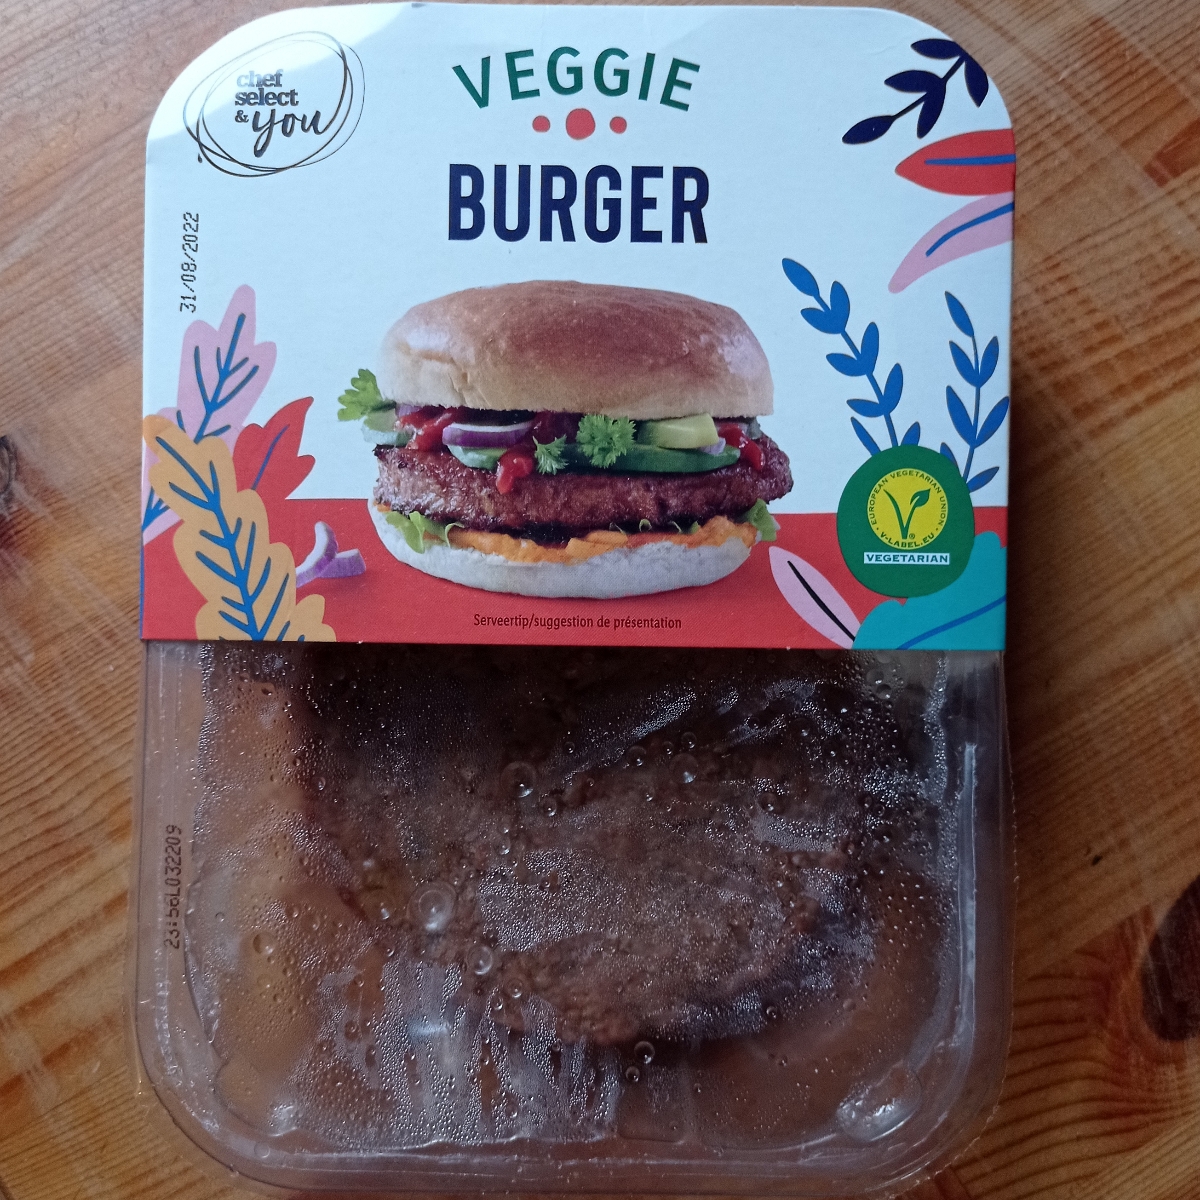 Chef select and you veggie burger Reviews | abillion